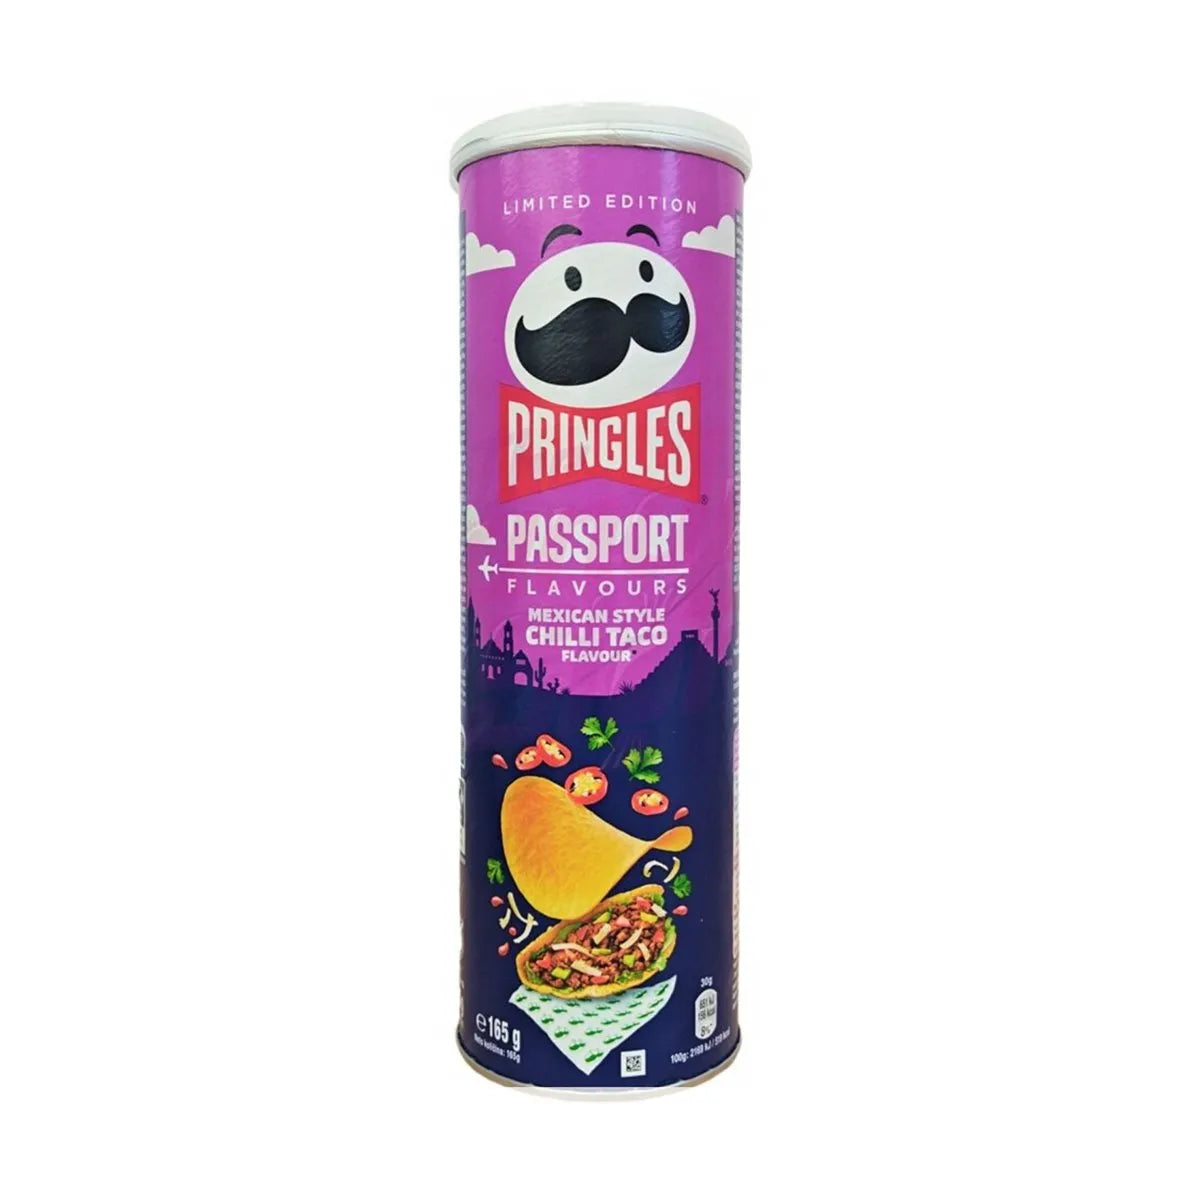 Pringles - PASSPORT Mexican Style Chilli Taco - Limited Edition - 185g